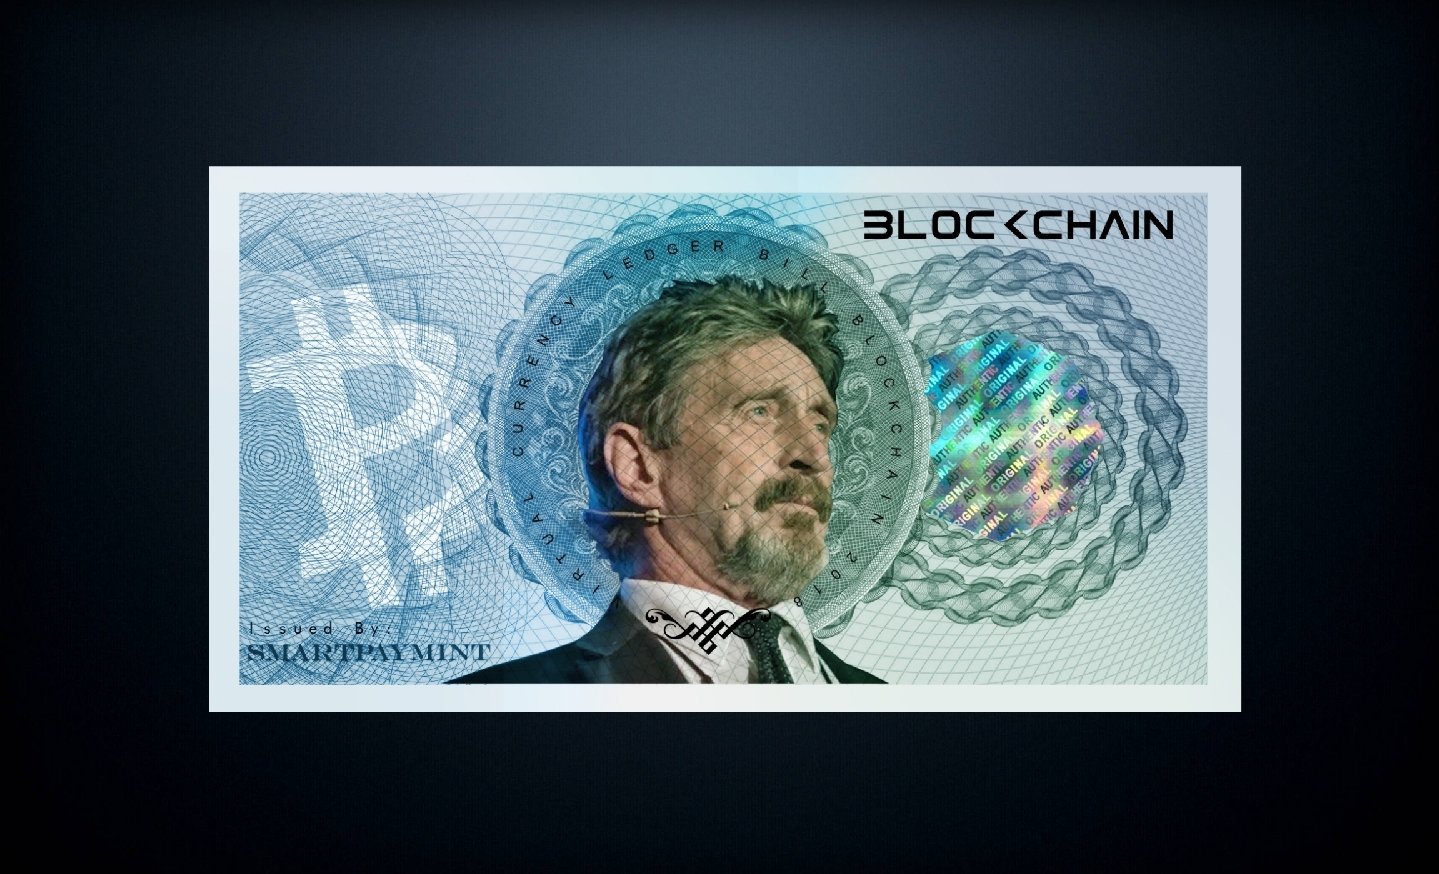 McAfee Redemption Unit (MRU): The Crypto-Backed FIAT Proposed by John Mcafee 16